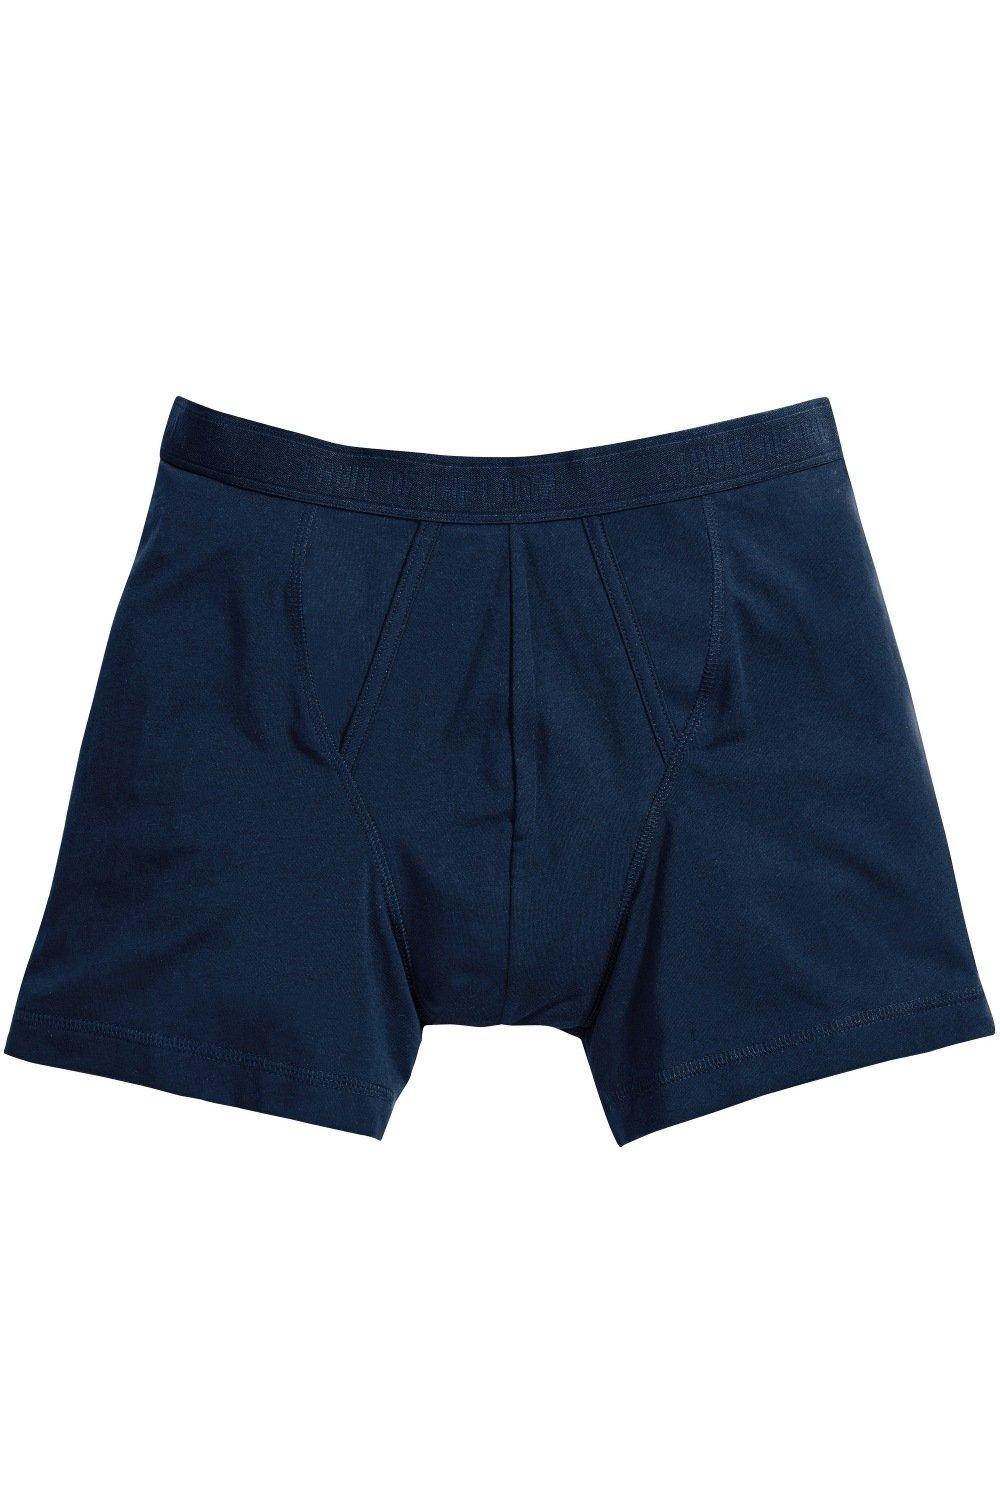 Classic Boxer Shorts (Pack Of 2)